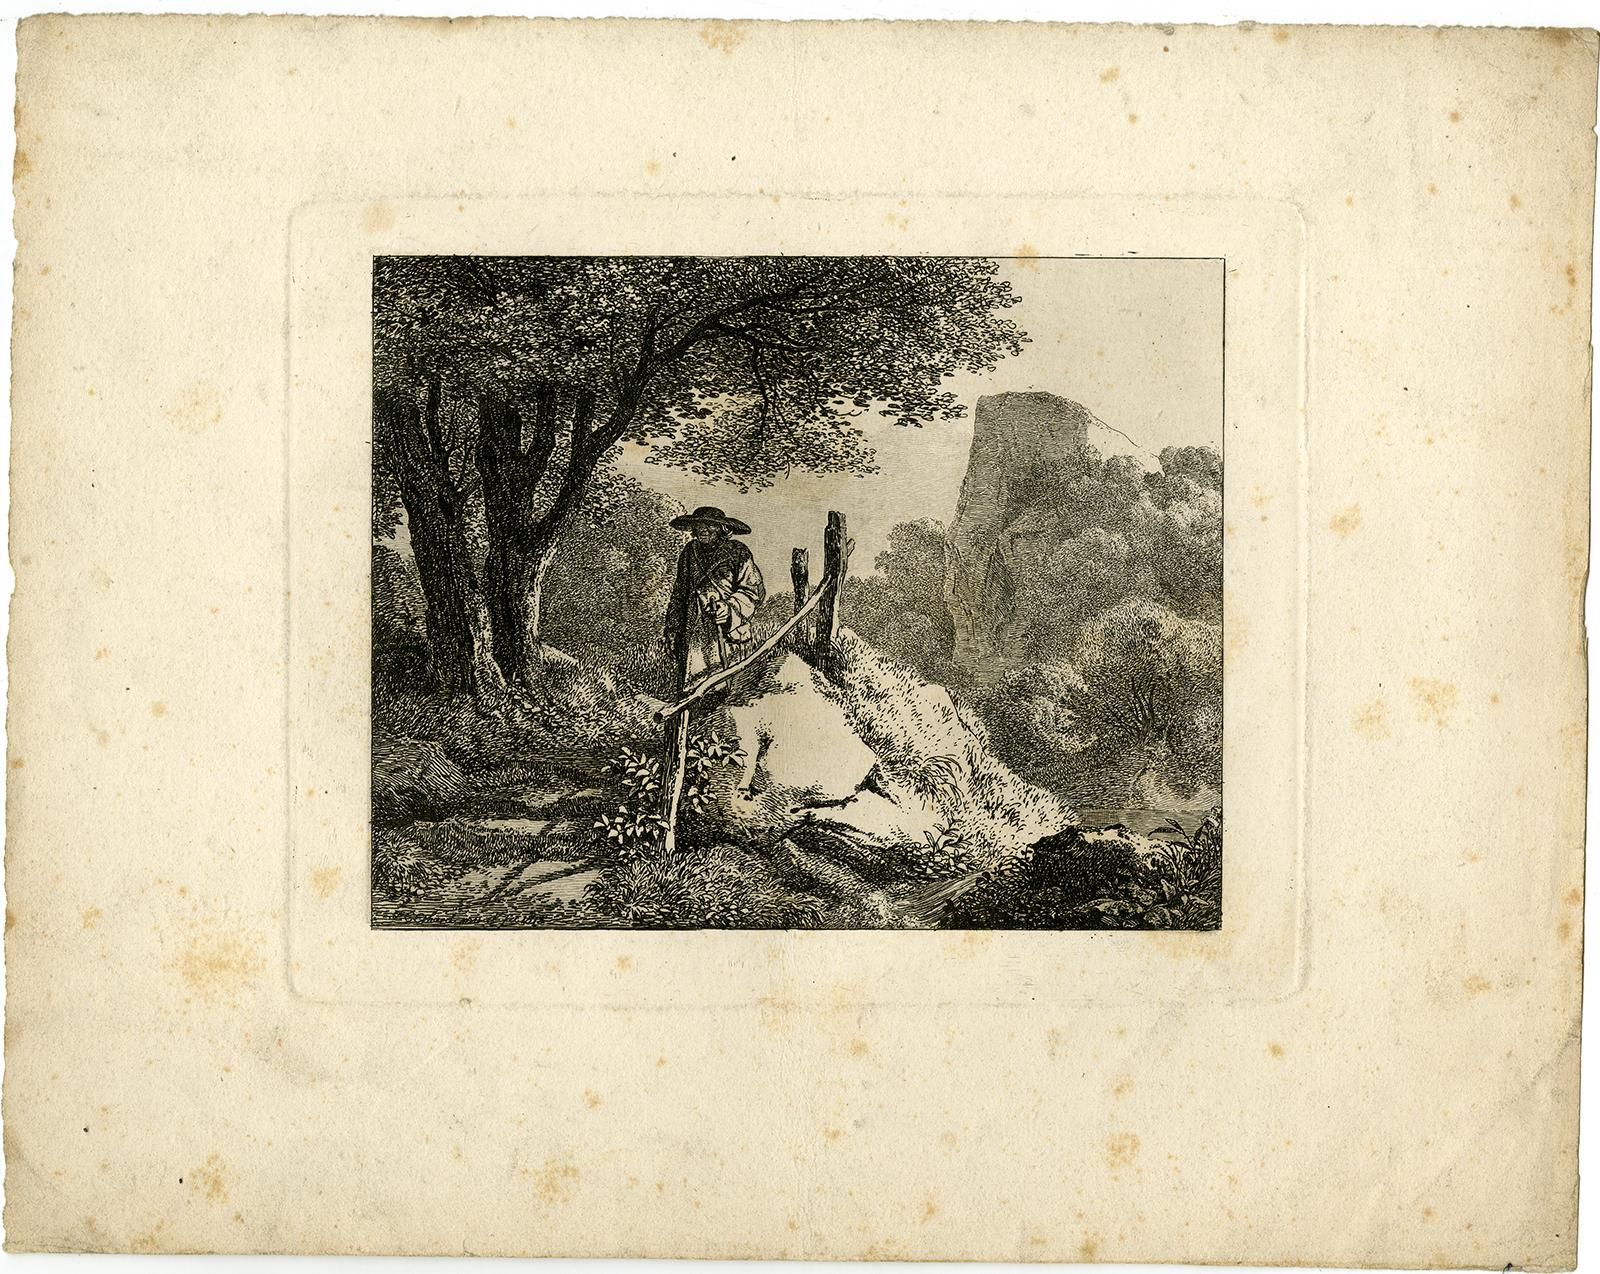 Subject:  Antique Master Print, untitled.  - Landscape with a man walking down a fenced path.

Description:  From a set of views around Salzburg. Ref: Apell ?.

Artists and Engravers:  Made by 'Johann Christoph Erhard' after own design. Johann